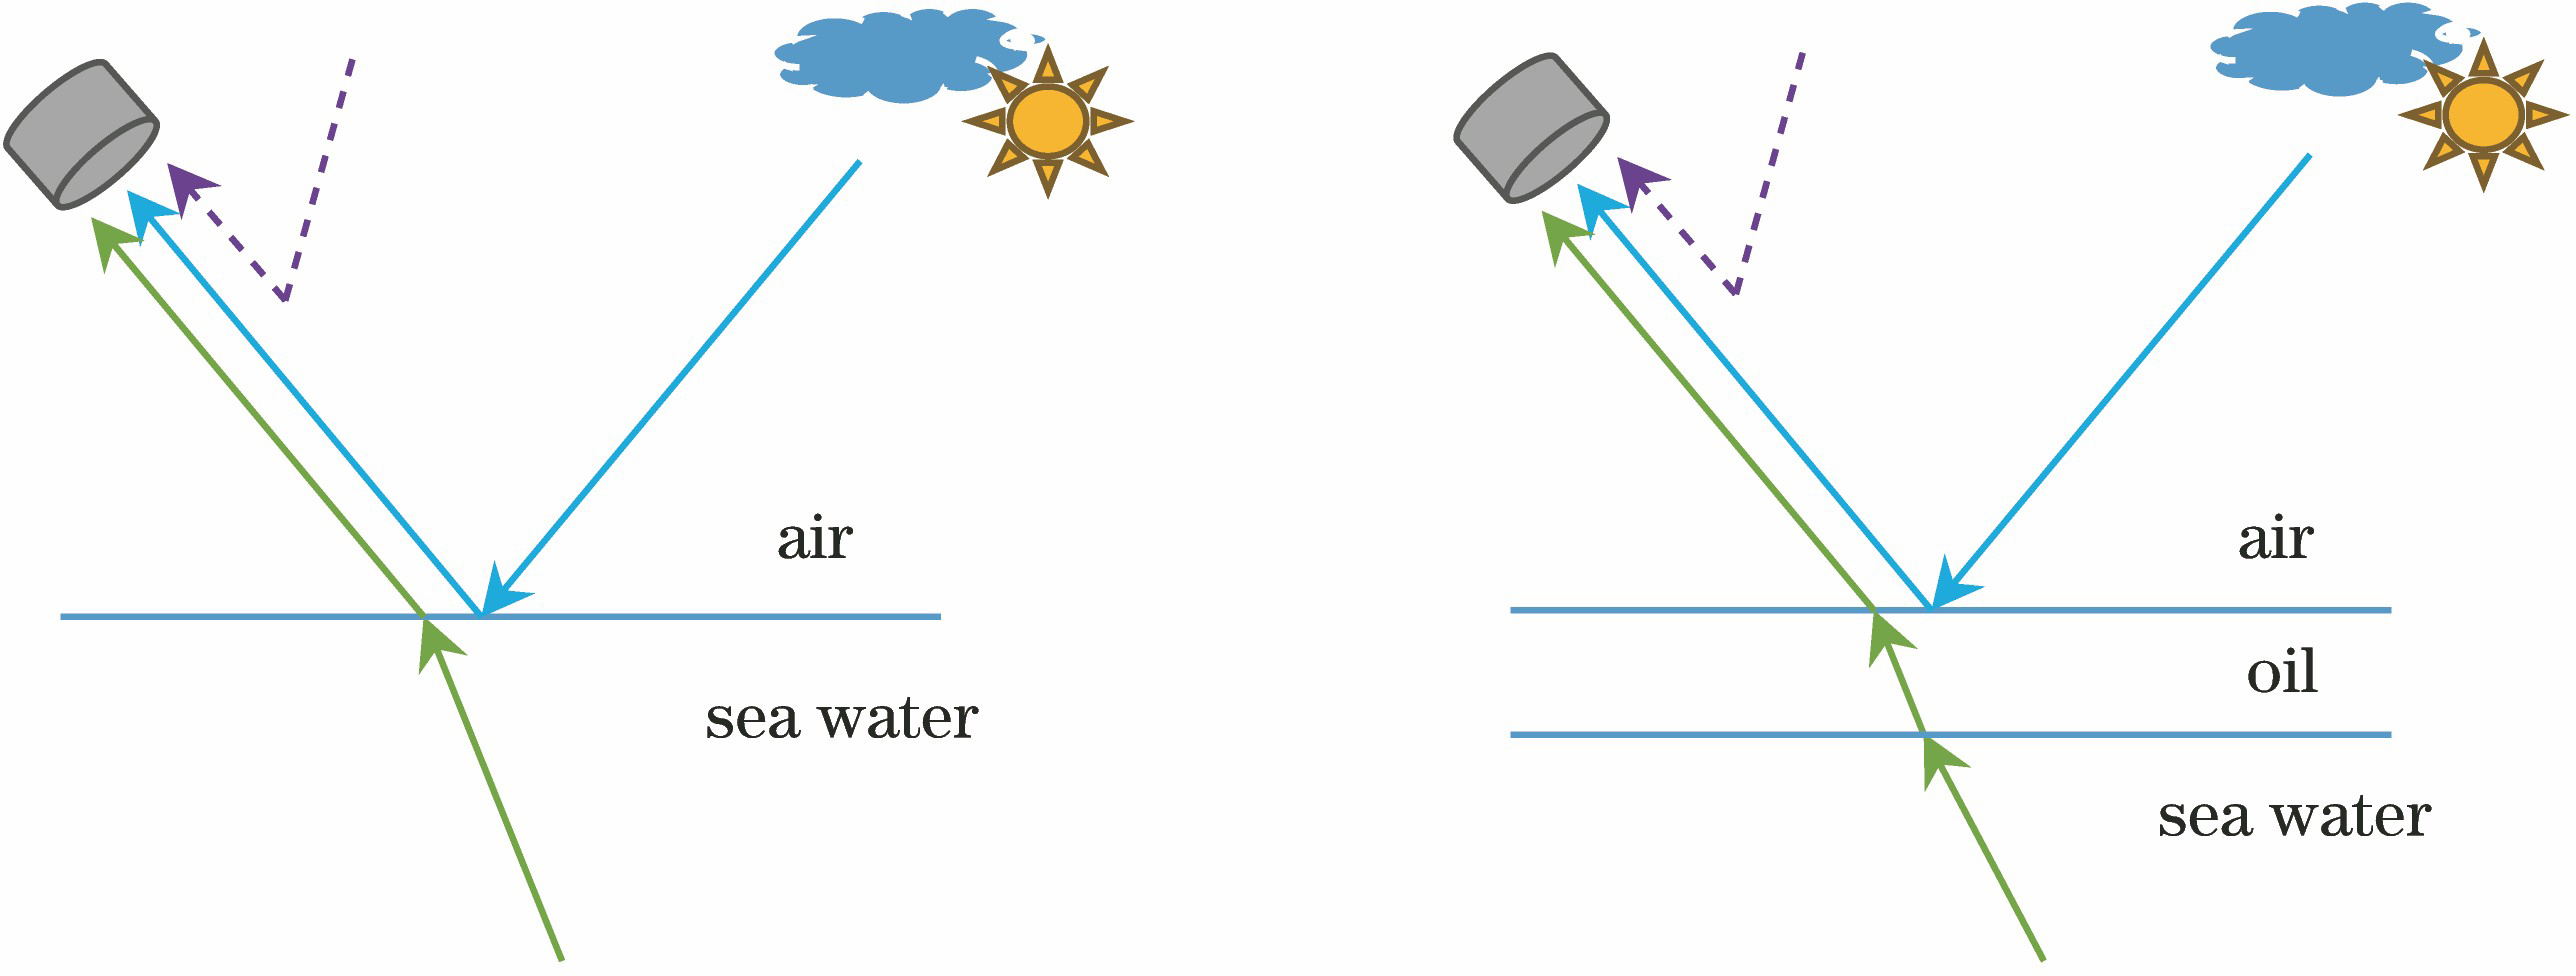 Upwelling radiation modes of clear seawater and oily seawater